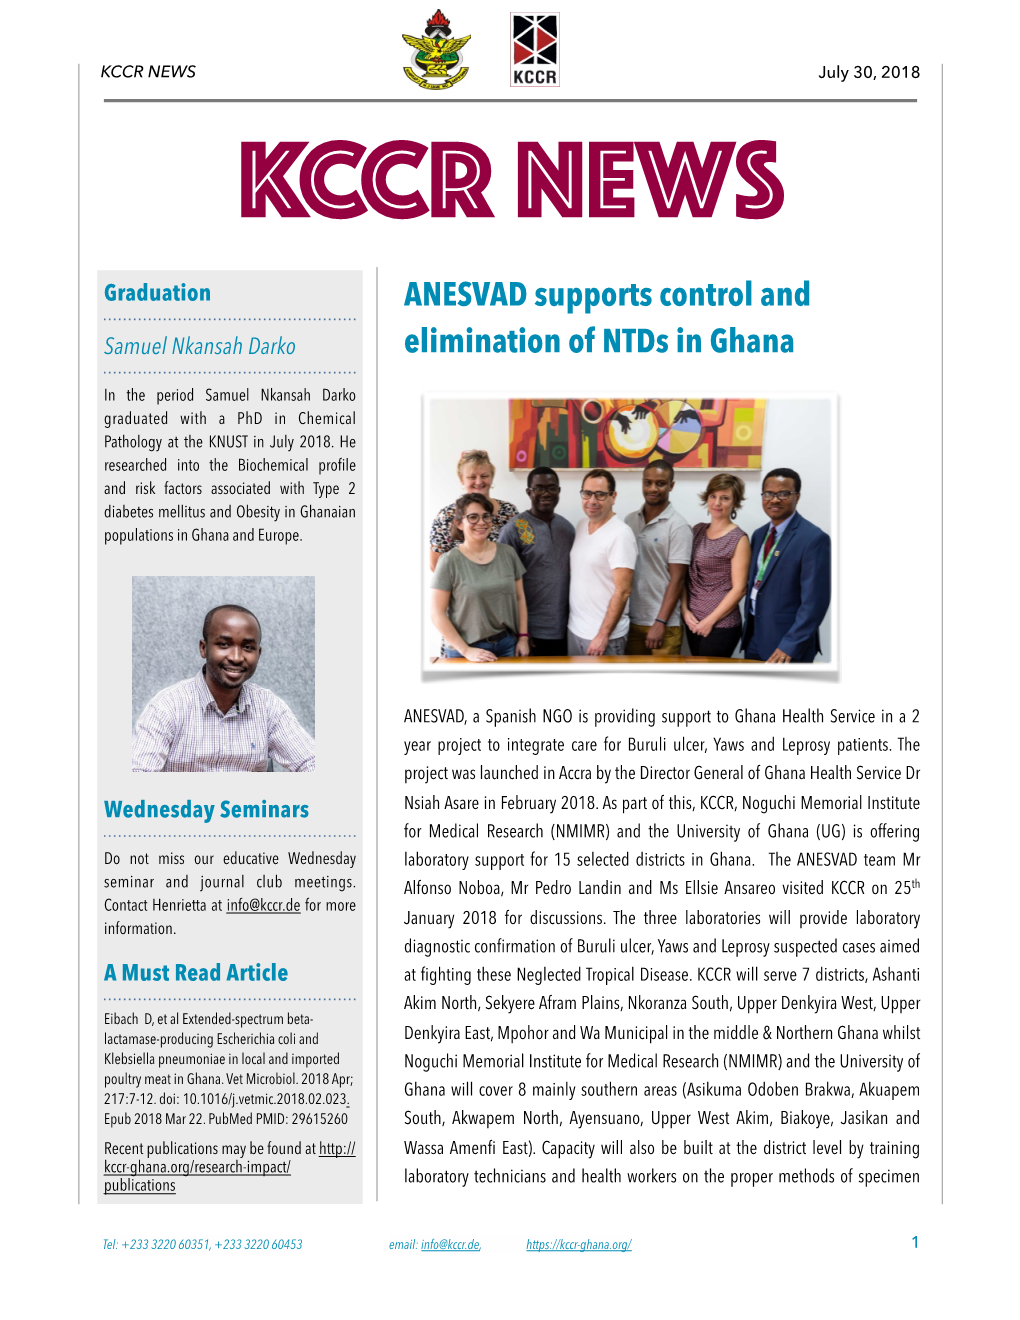 KCCR News July 2018 Edited 2.Pages